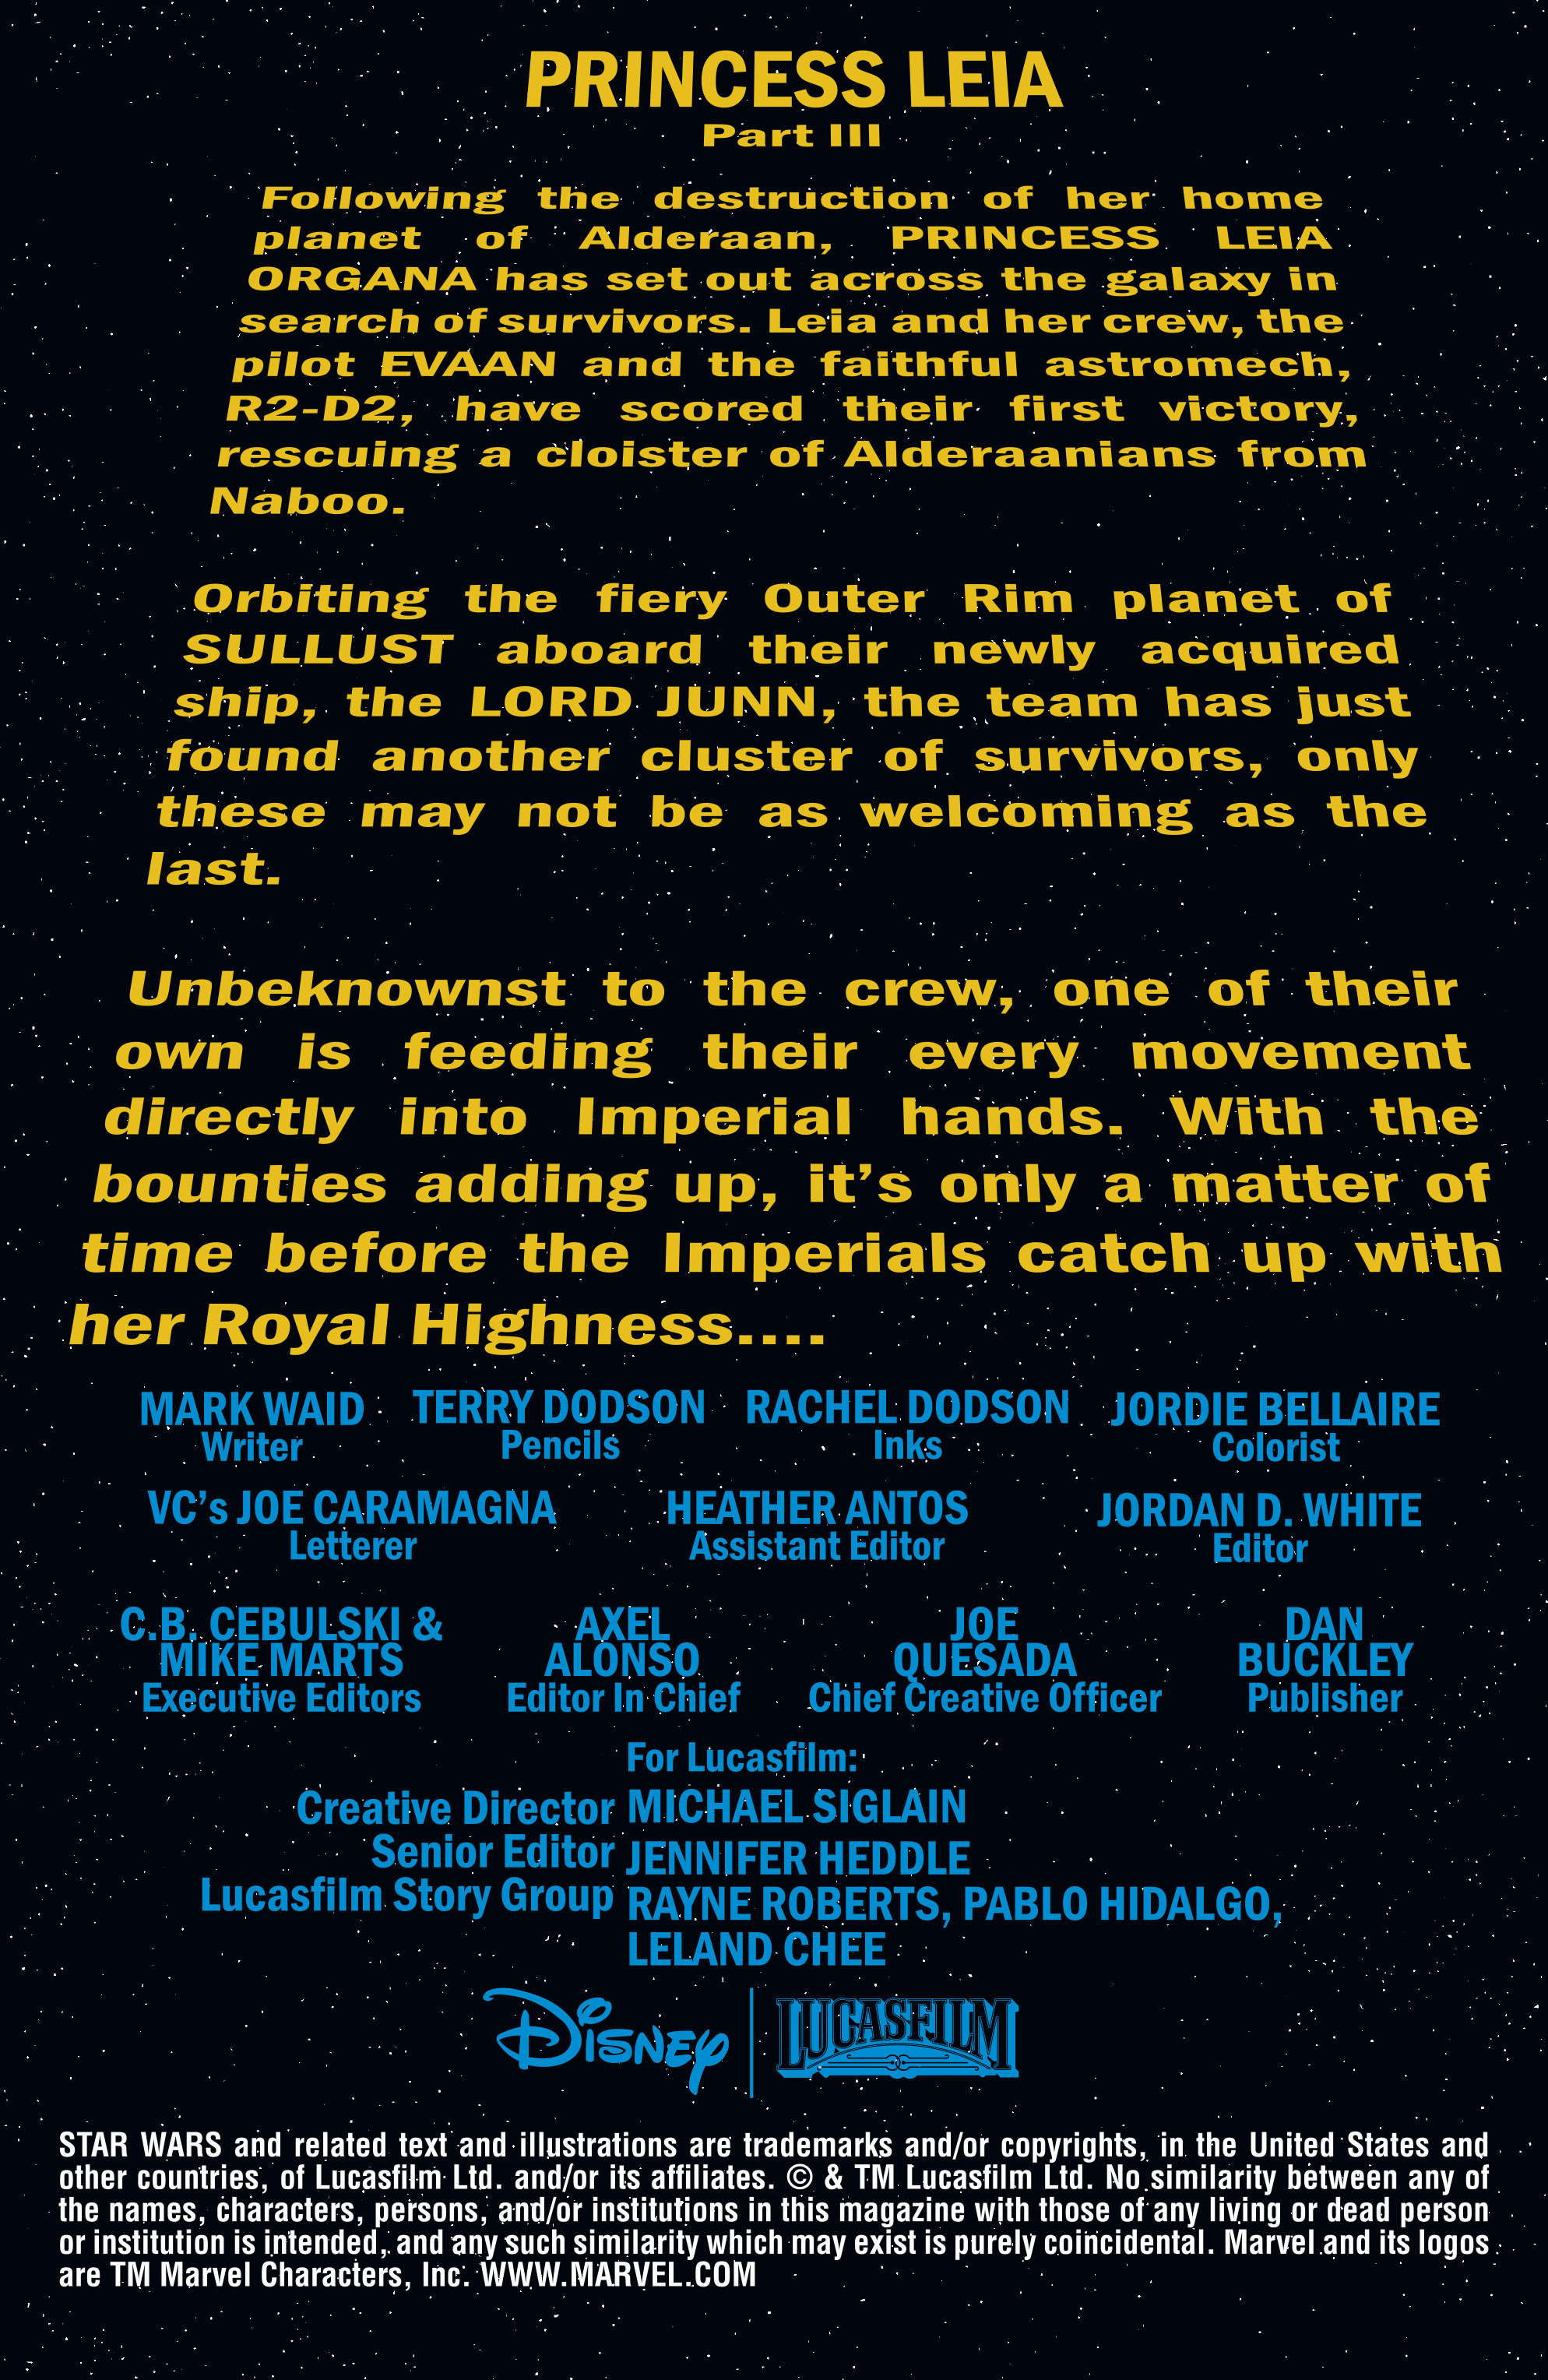 Read online Princess Leia comic -  Issue #3 - 2